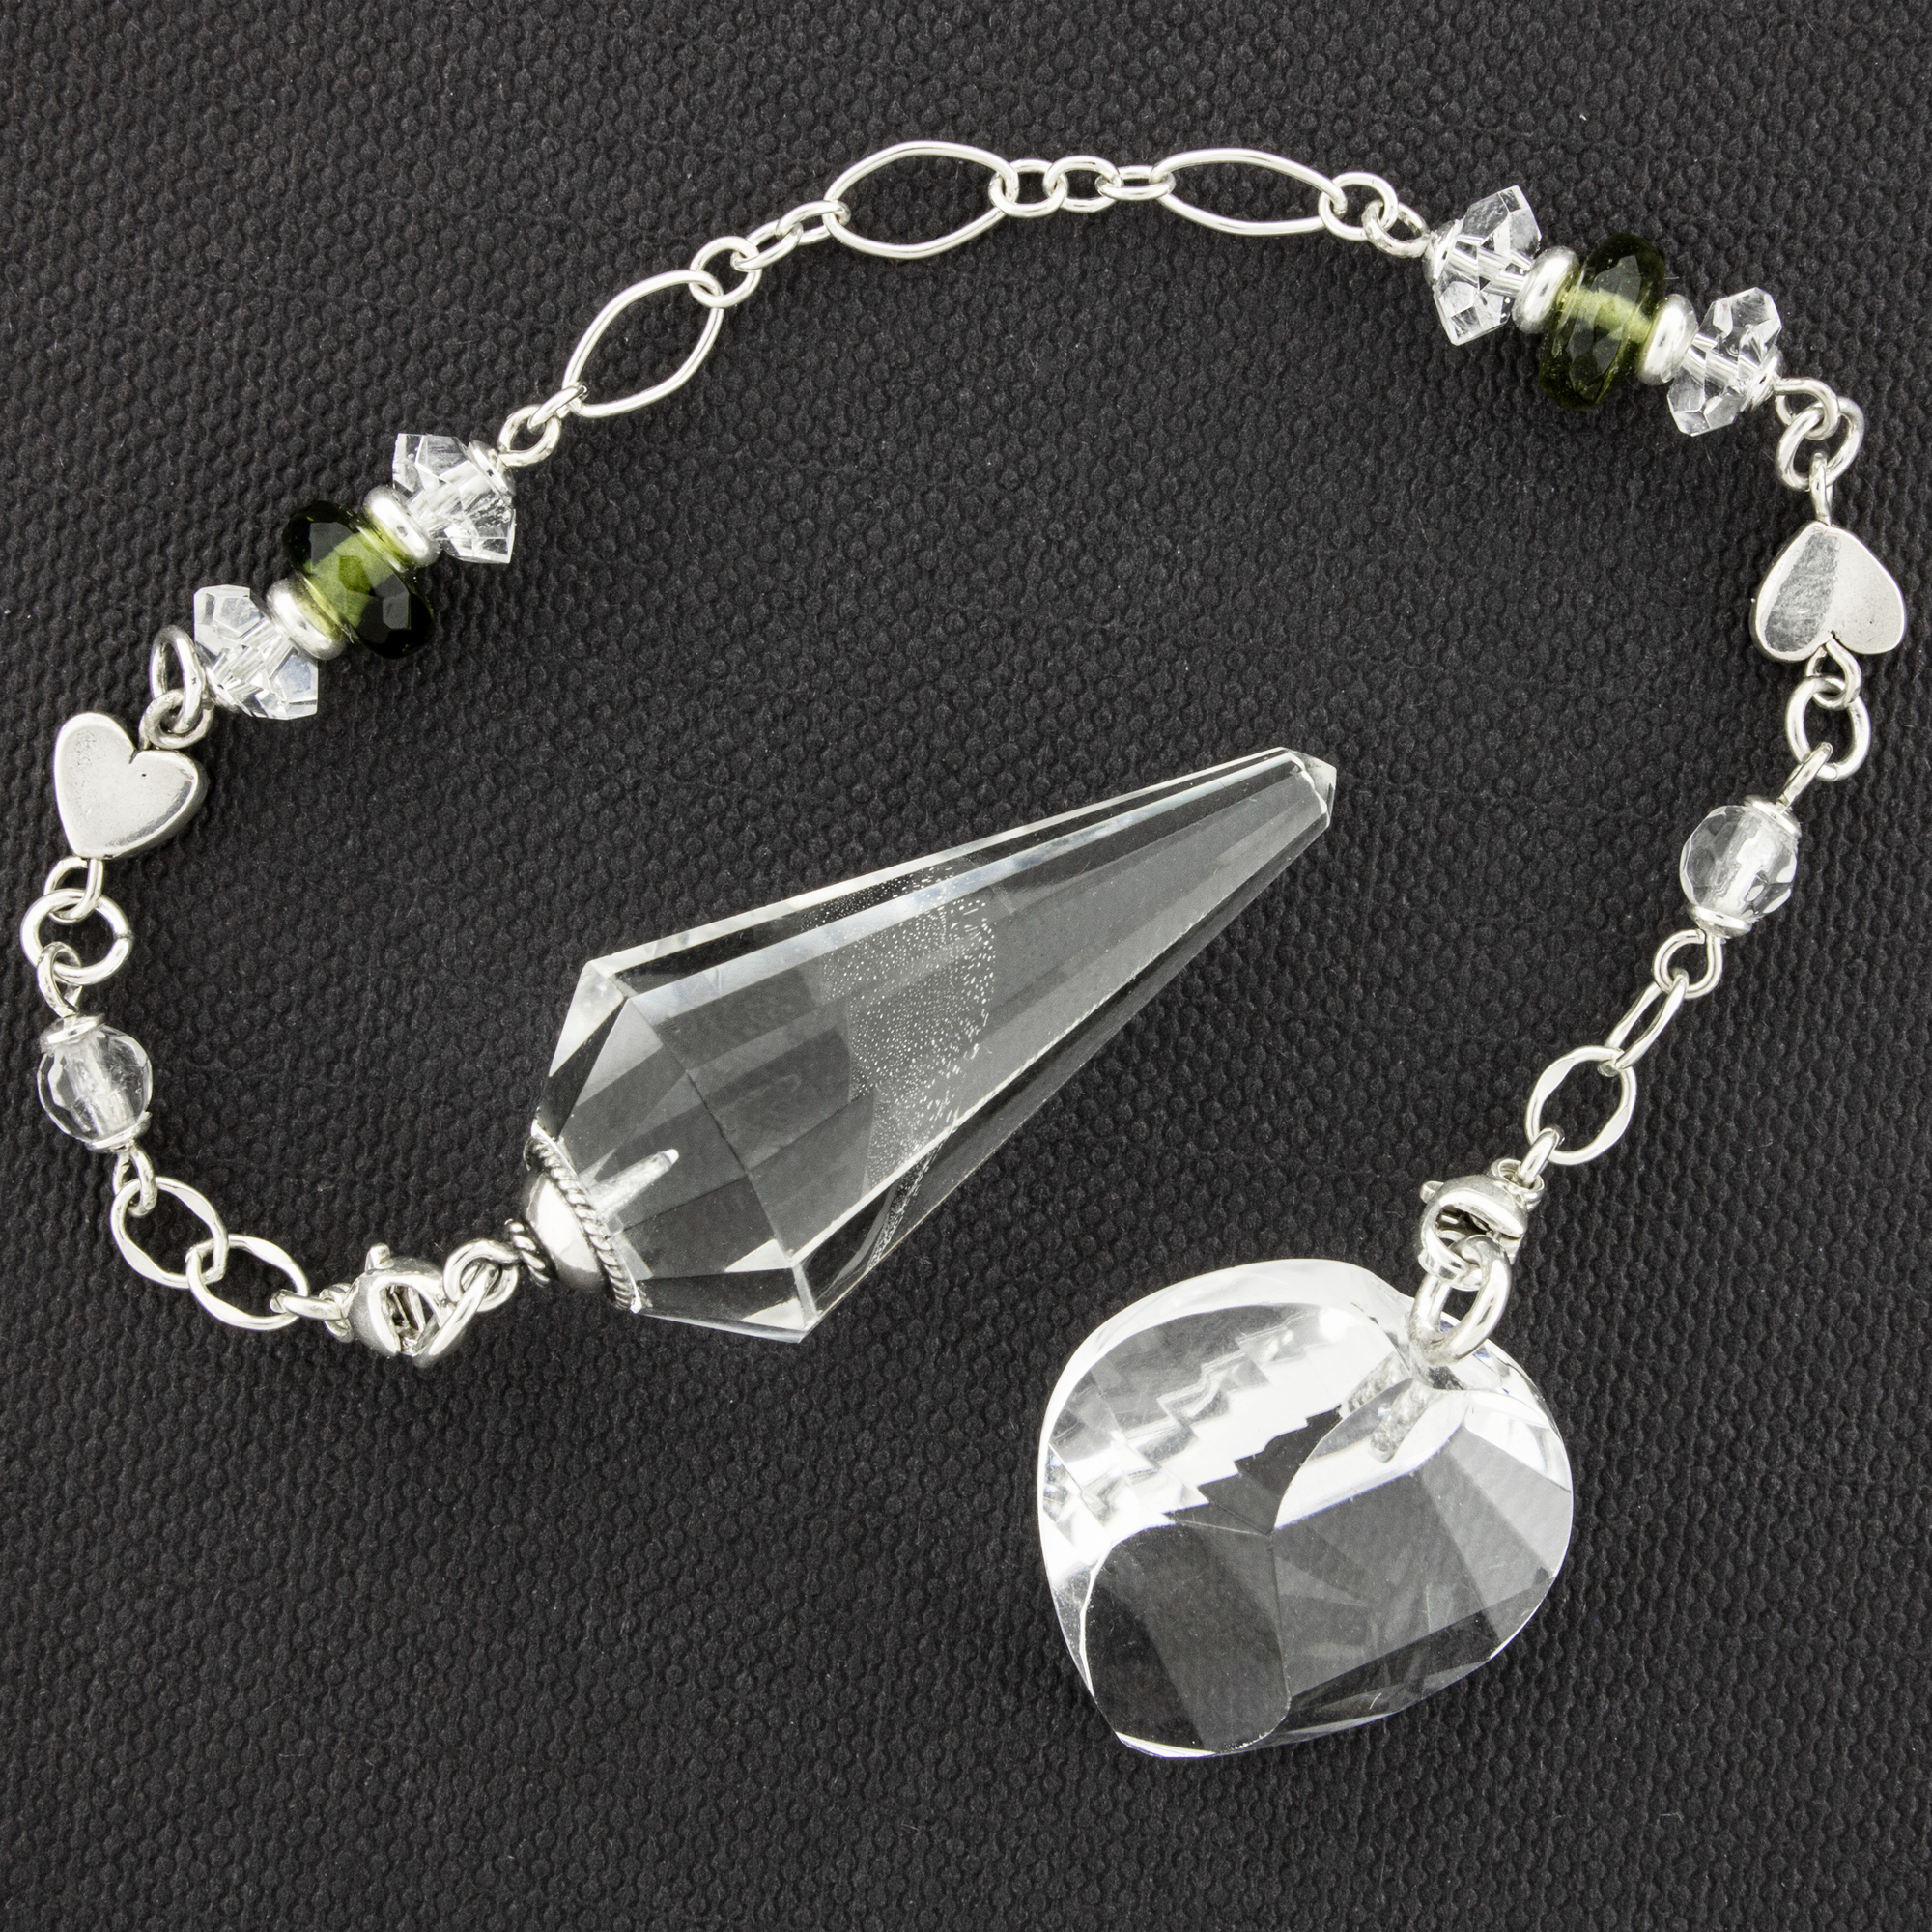 One of a Kind #387 - Clear Quartz, Moldavite and Sterling Silver Pendulum